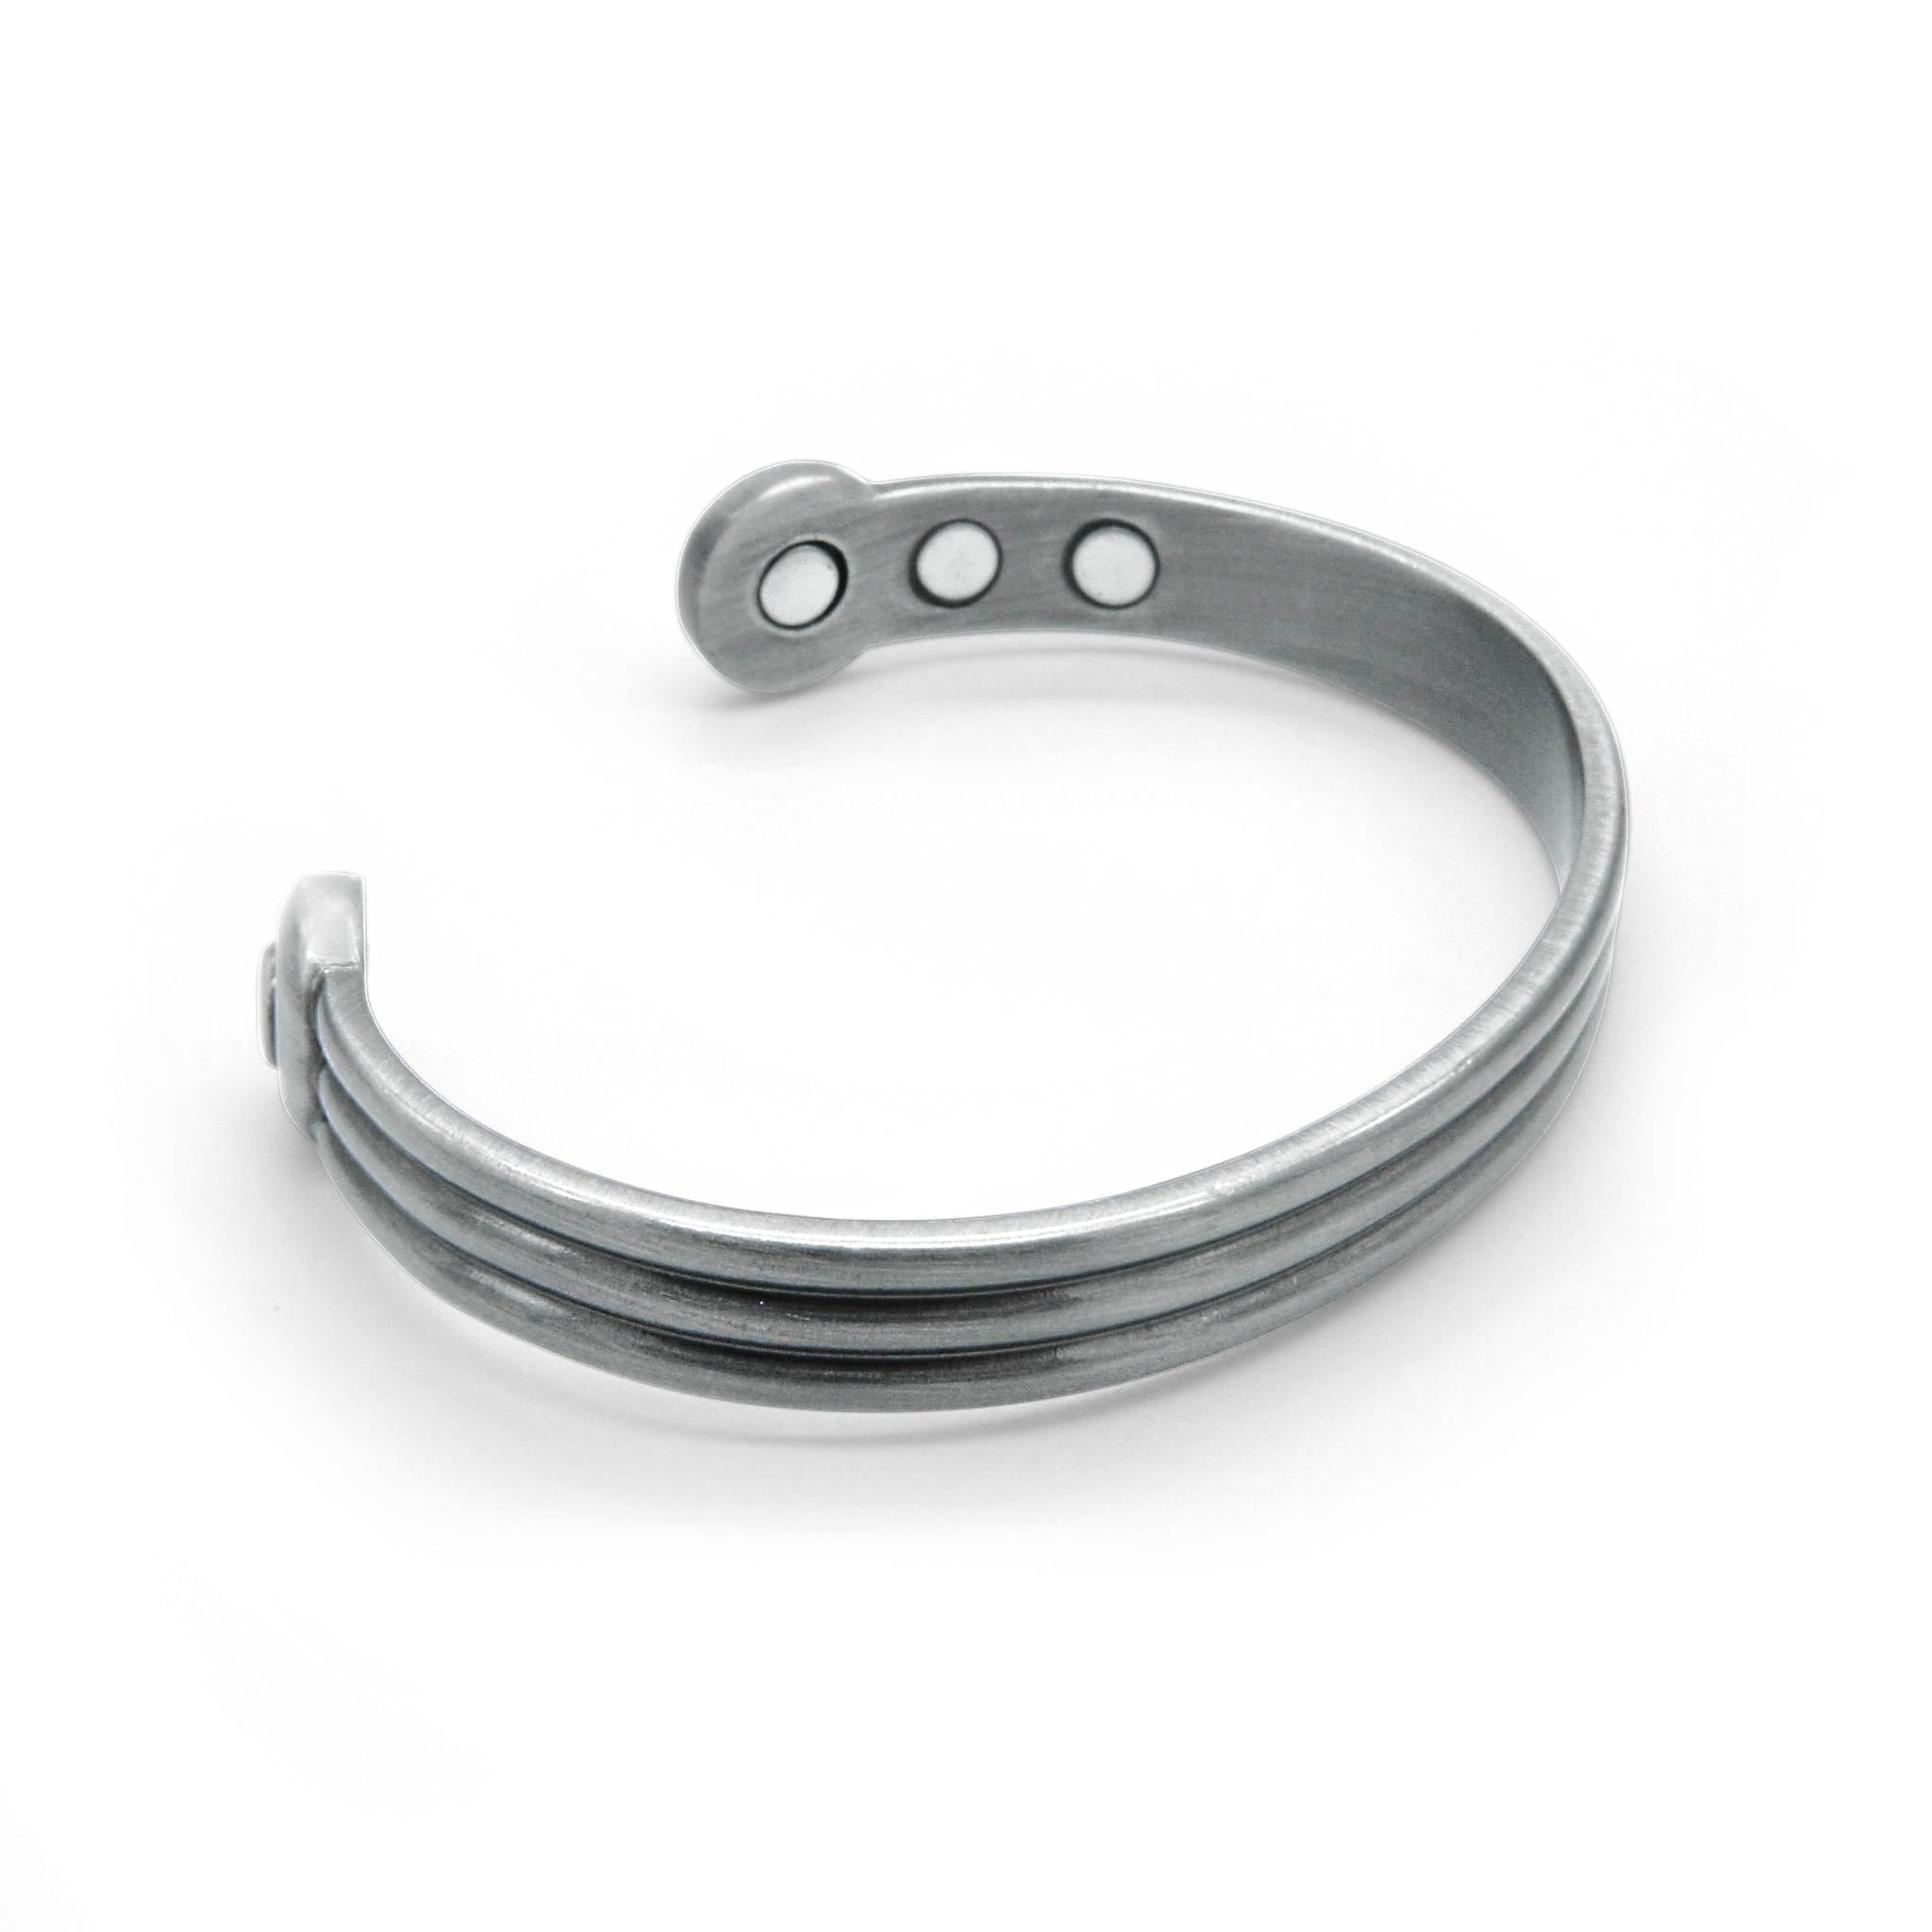 Axle Pewter Torque magnetic bangle-DEMI+CO Jewellery